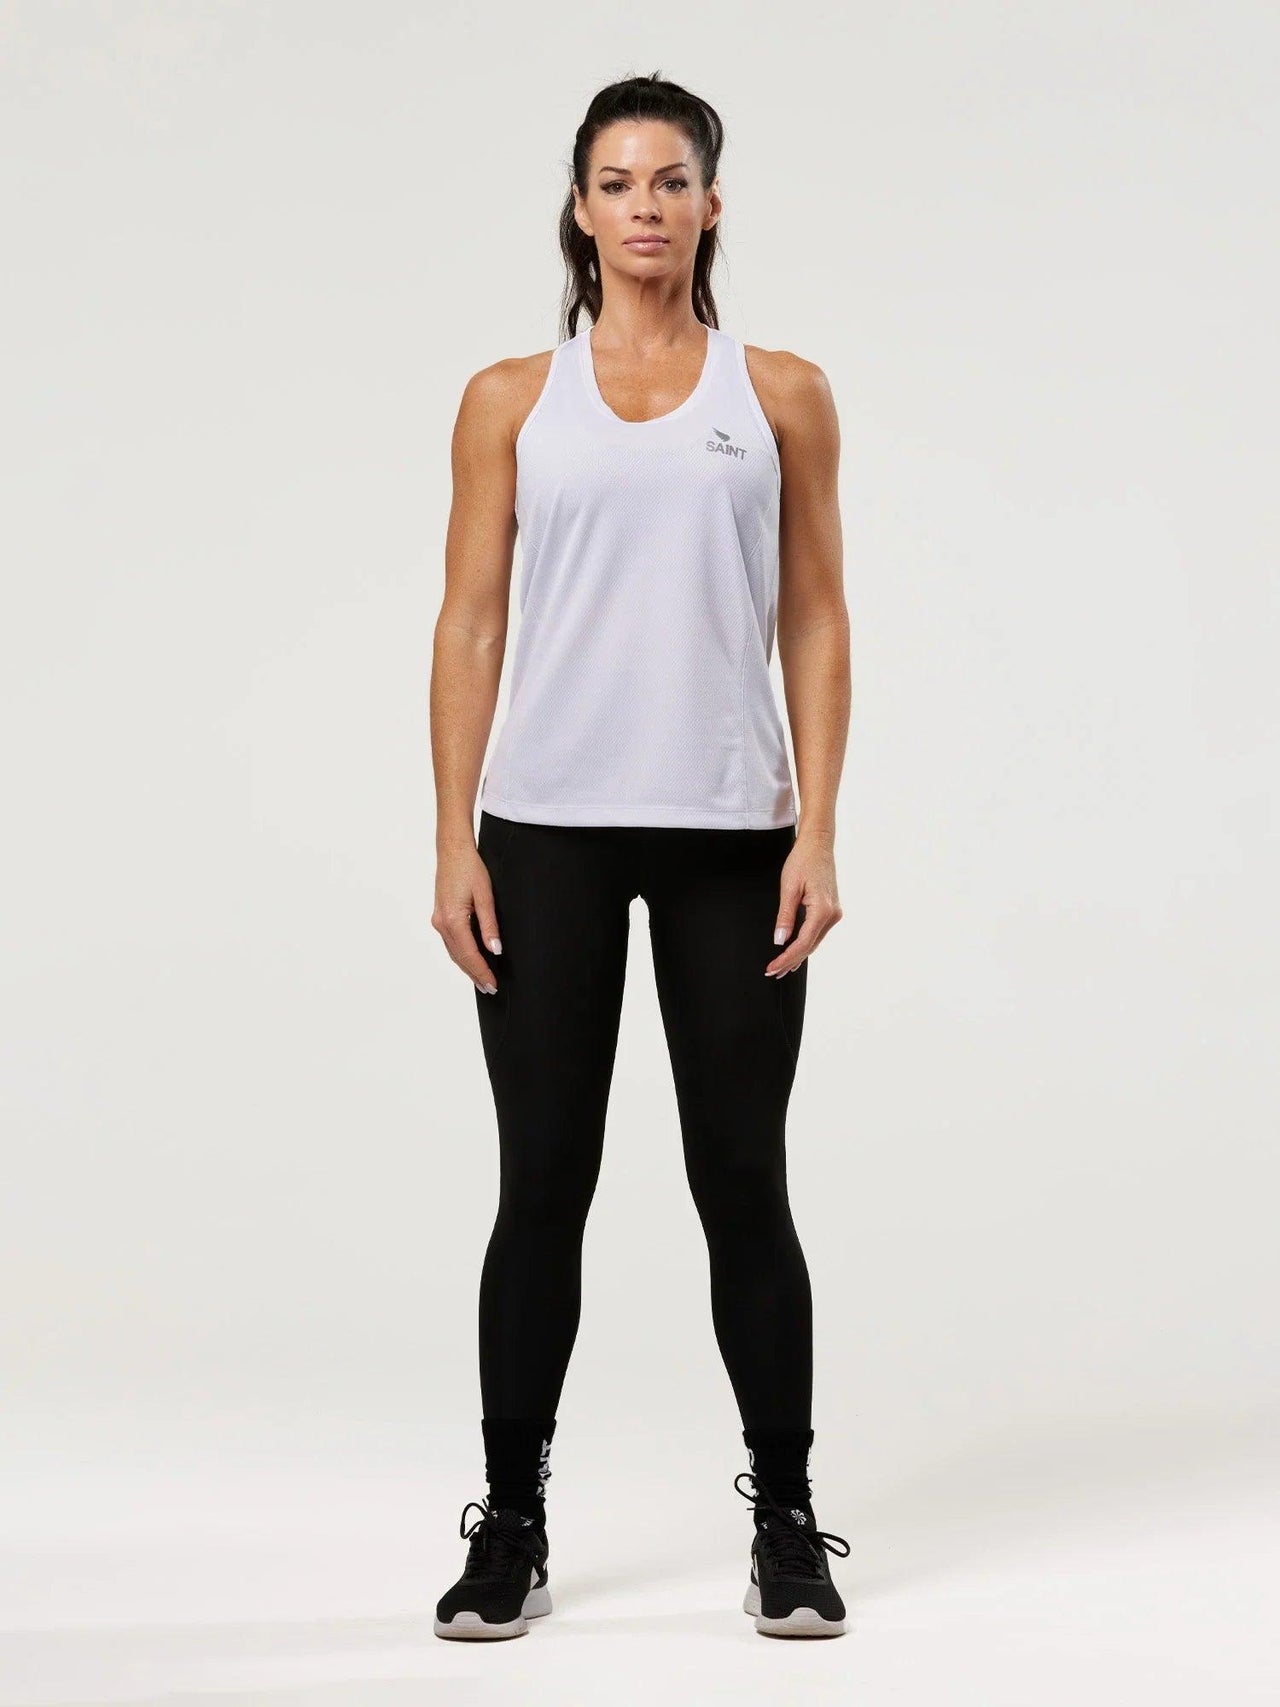 Interval Training Is The SHIIT Women's Tank Top